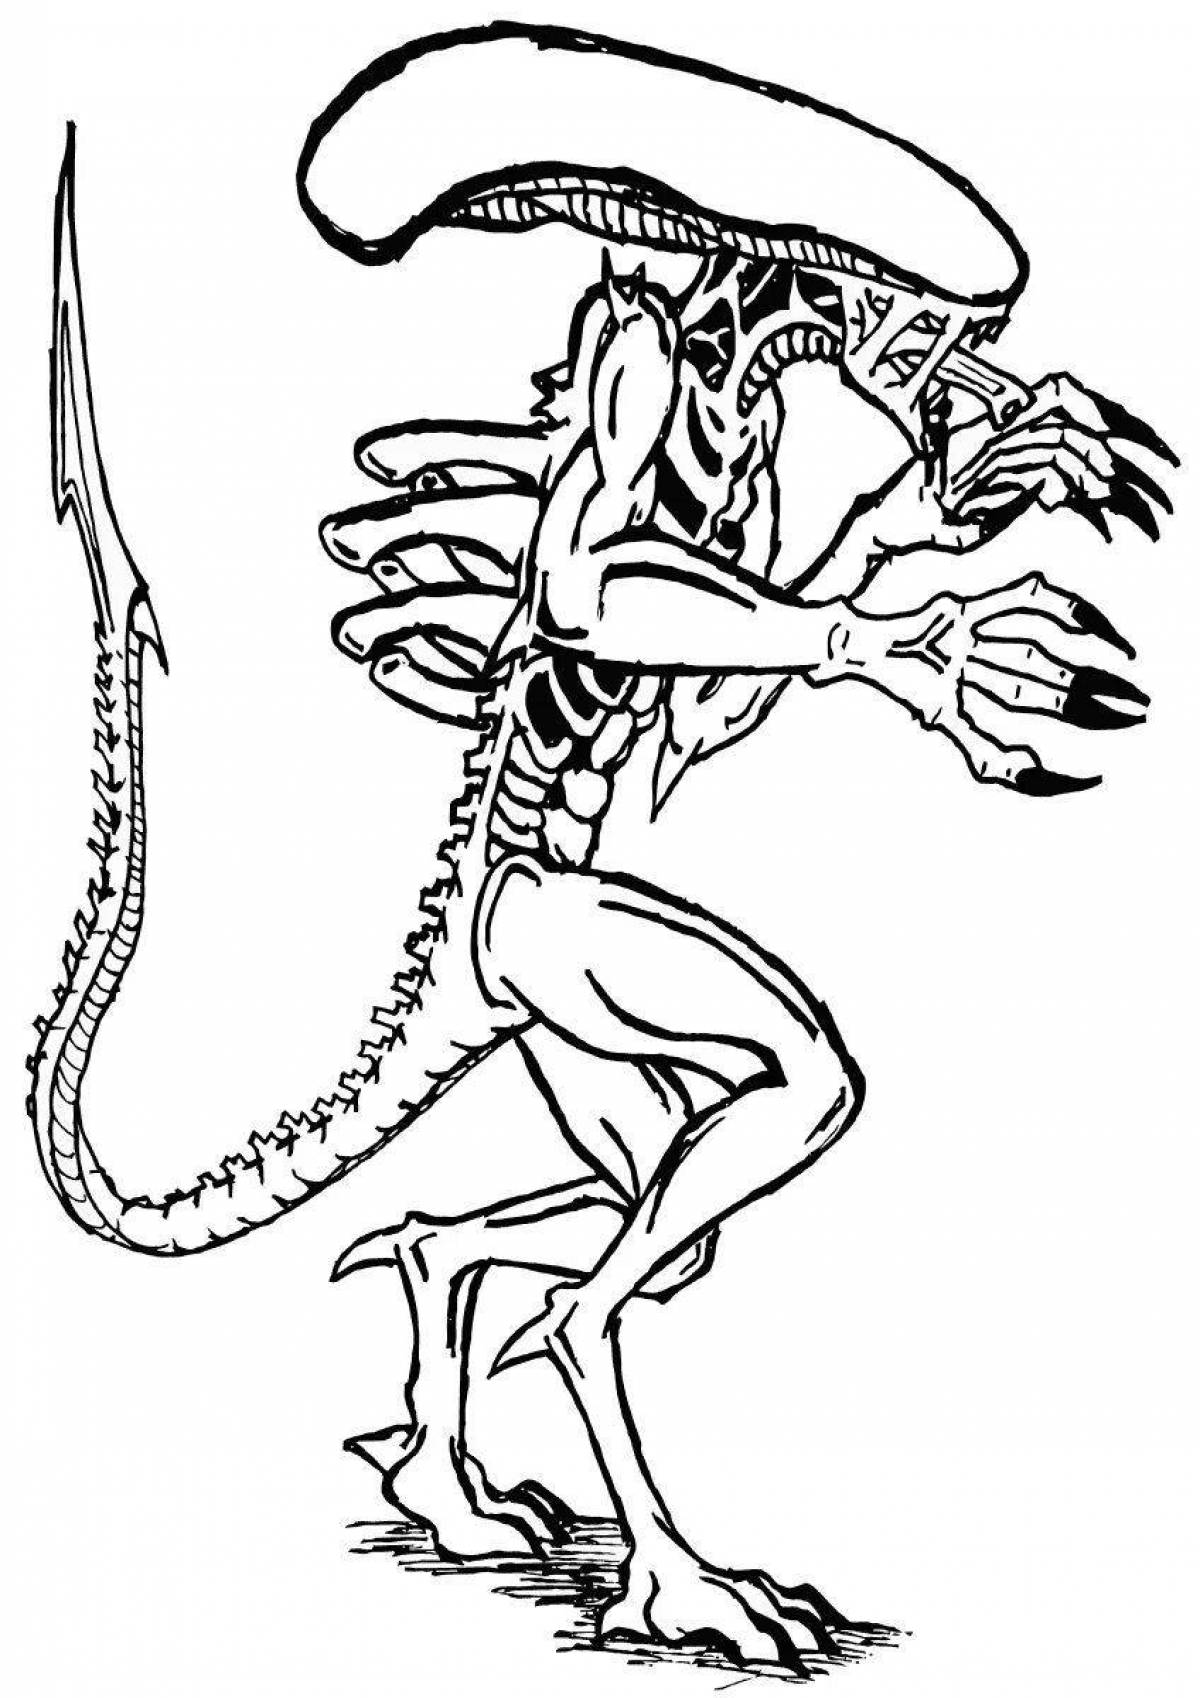 Coloring page unidentified monster with siren's head